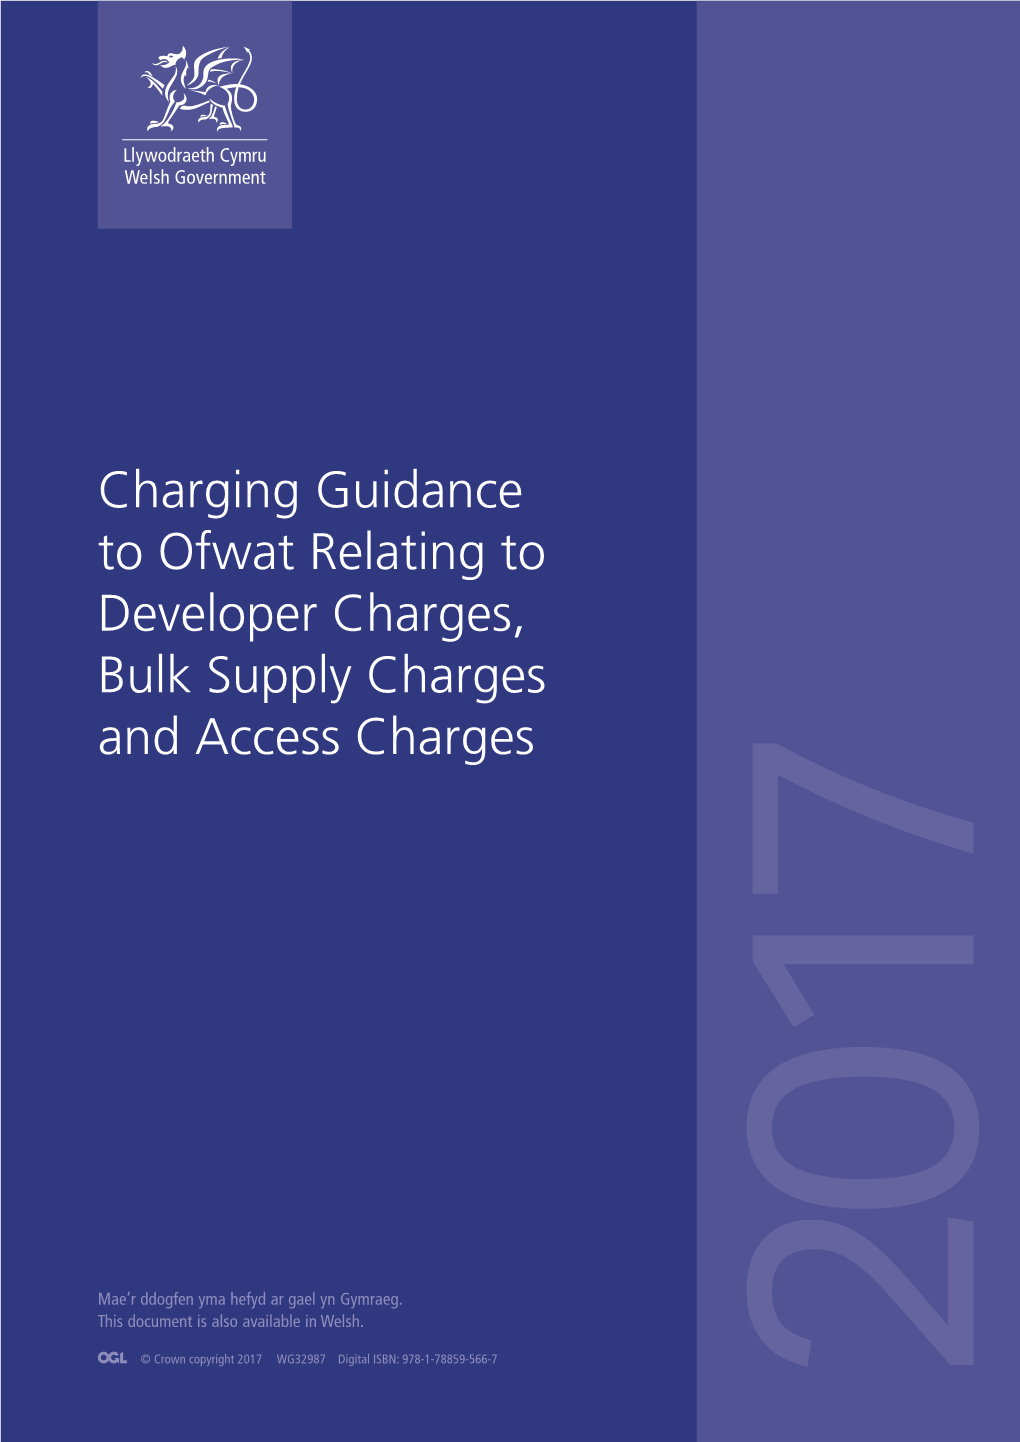 Charging Guidance to Ofwat Relating to Developer Charges, Bulk Supply Charges and Access Charges